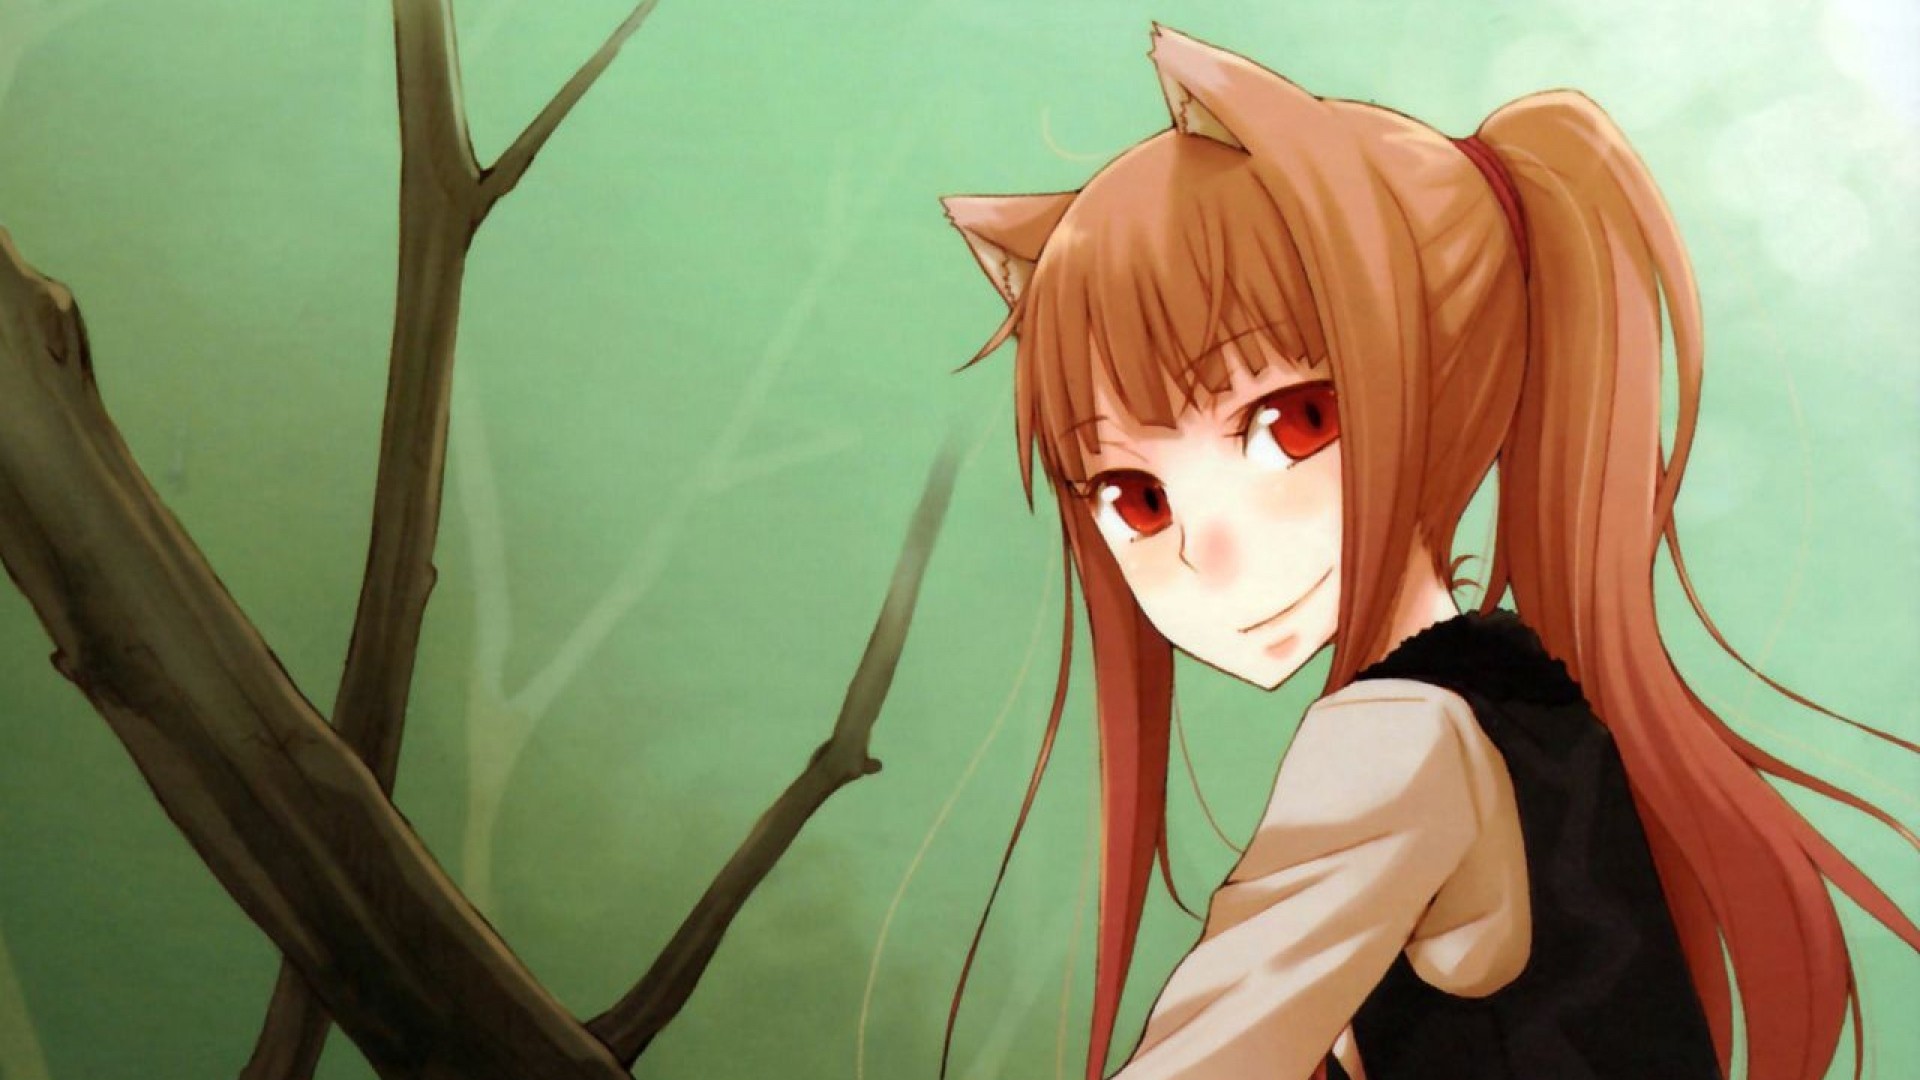 1920x1080 ... girl, smile, spice wolf